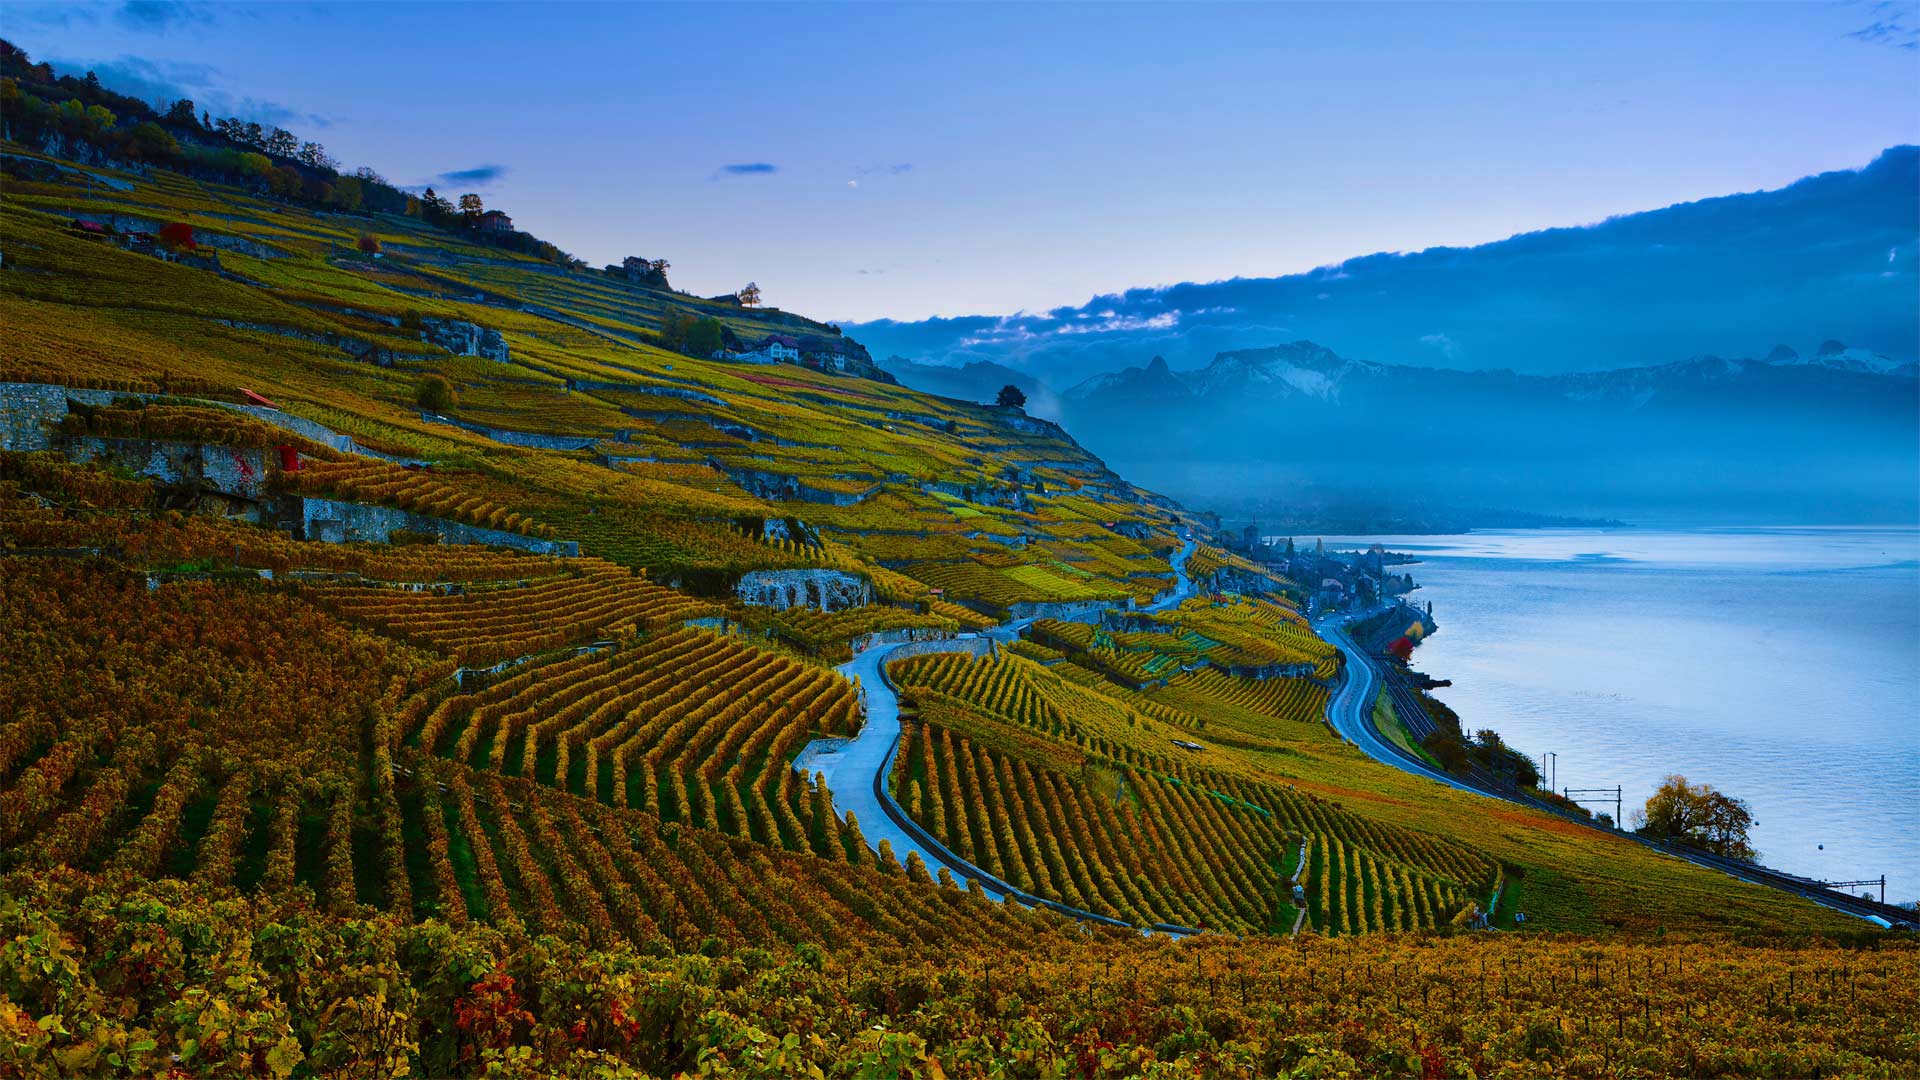 Steeply terraced vineyards of the Lavaux region on the shores of Lake Geneva, Switzerland - Yves Marcoux/plainpicture)